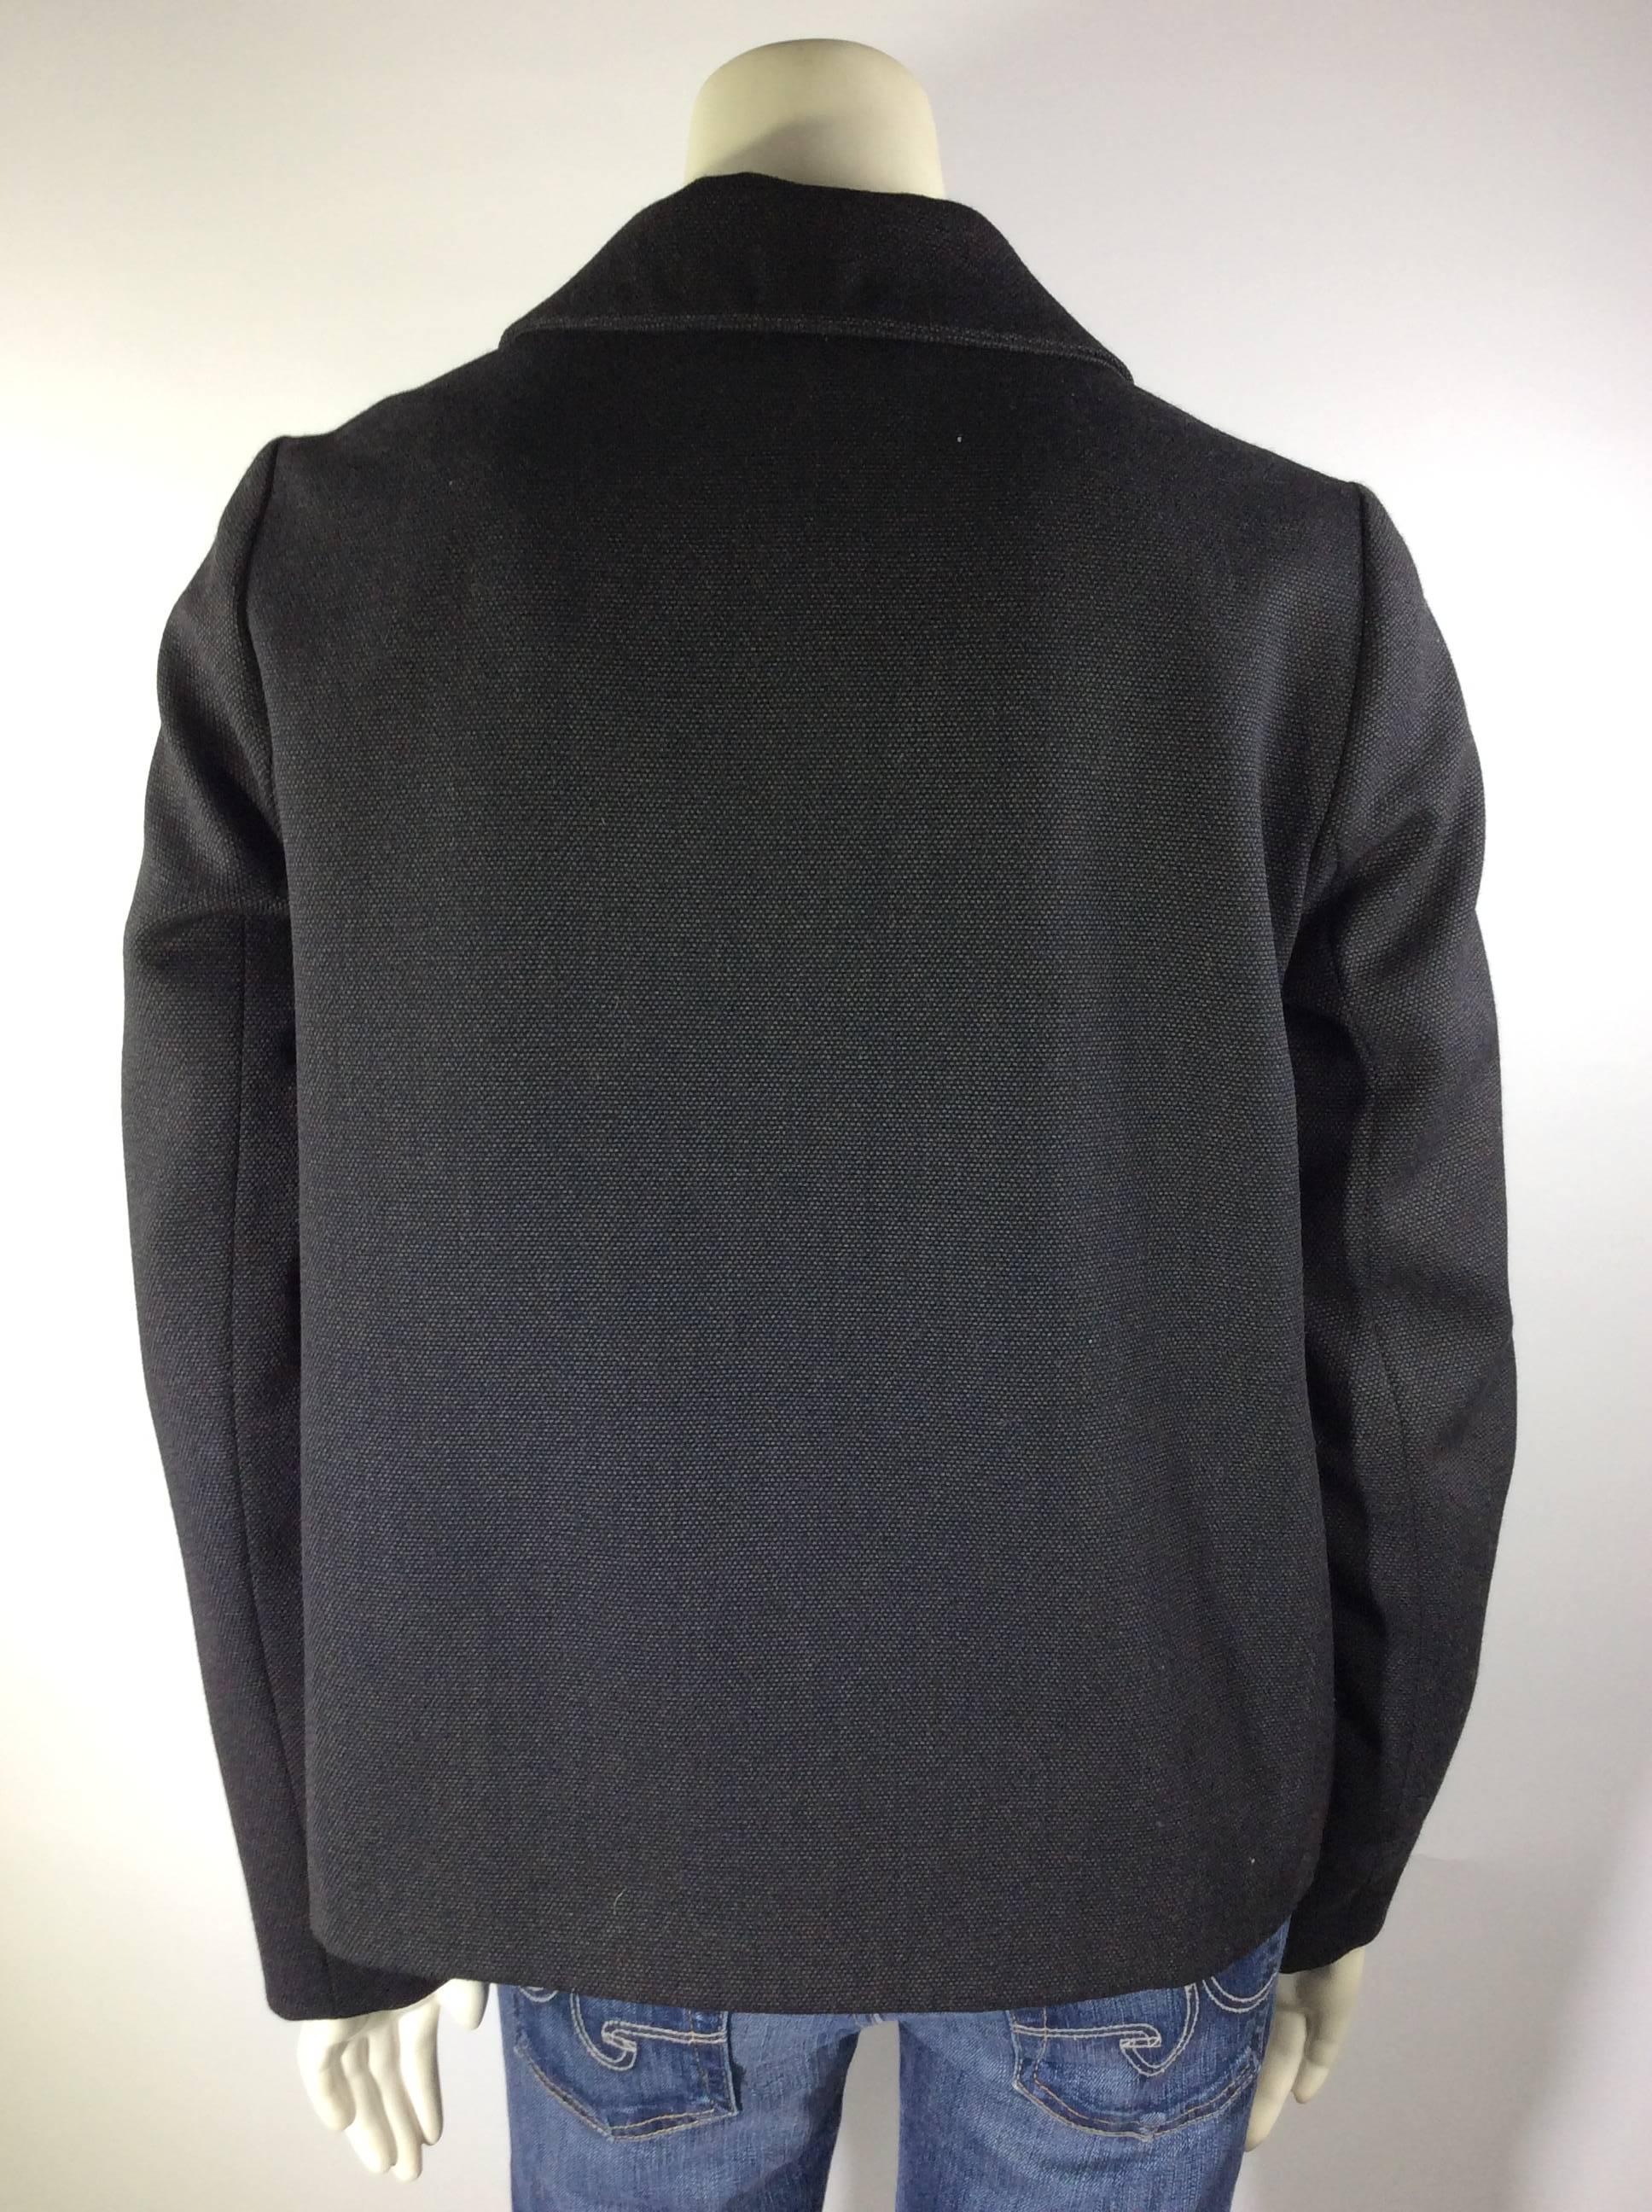 Chloe Charcoal Grey Wool Swing Jacket  In Excellent Condition For Sale In Narberth, PA